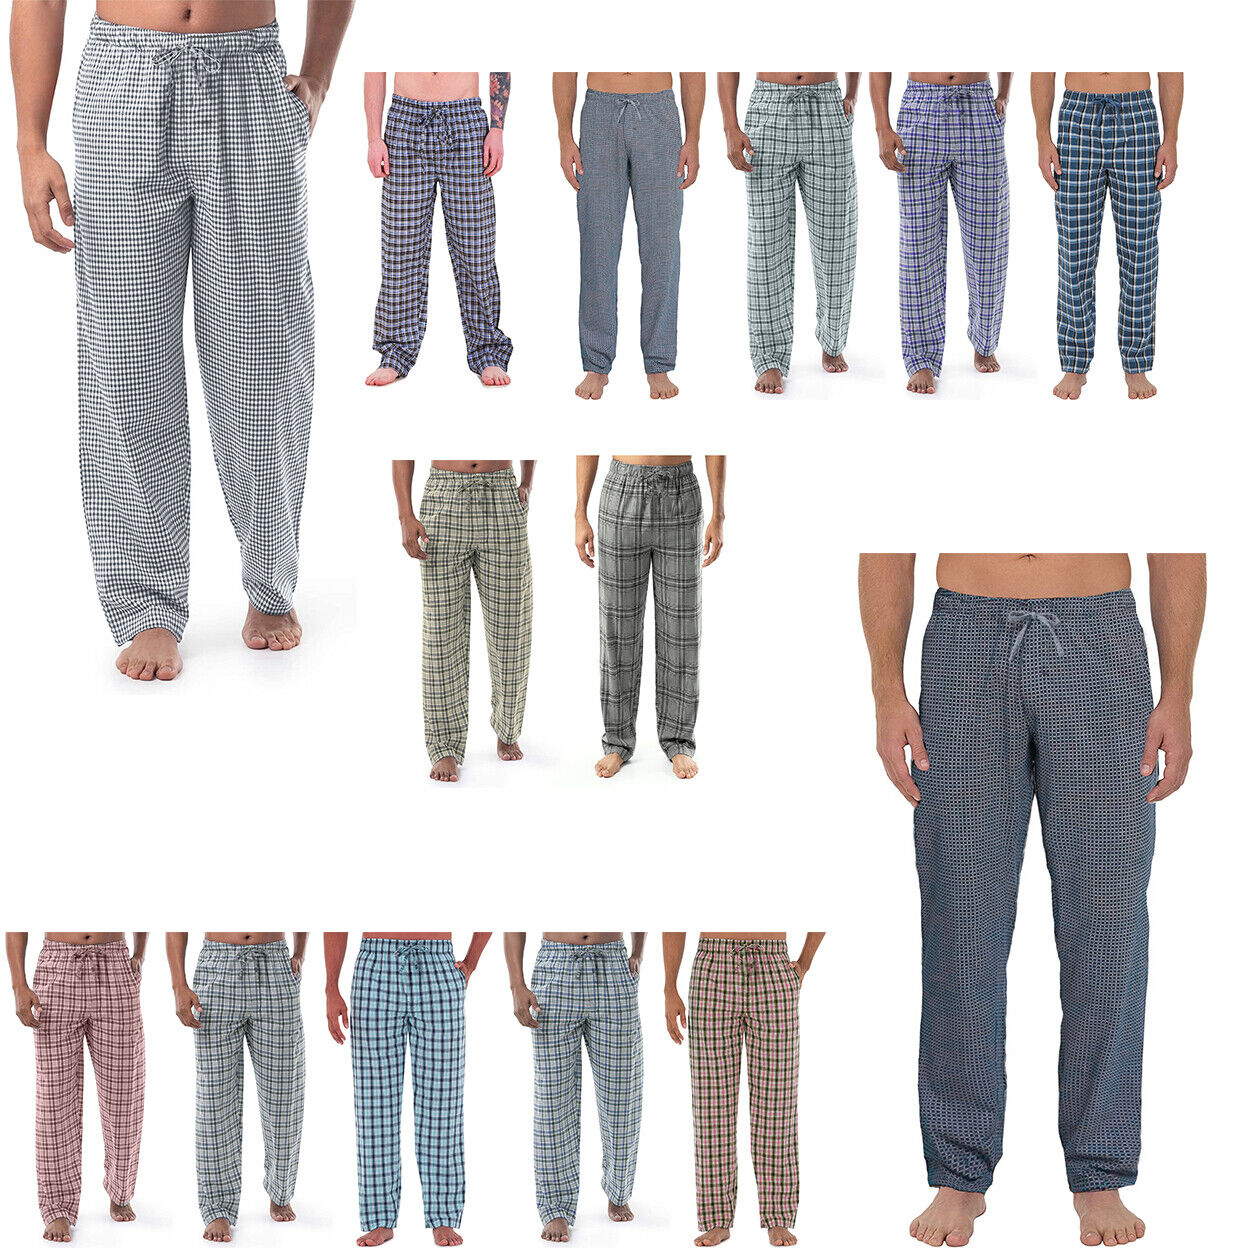 Multi-Pack: Men's Ultra-Soft Solid & Plaid Cotton Jersey Knit Comfy Sleep Lounge Pajama Pants - 3-pack Solid, X-large